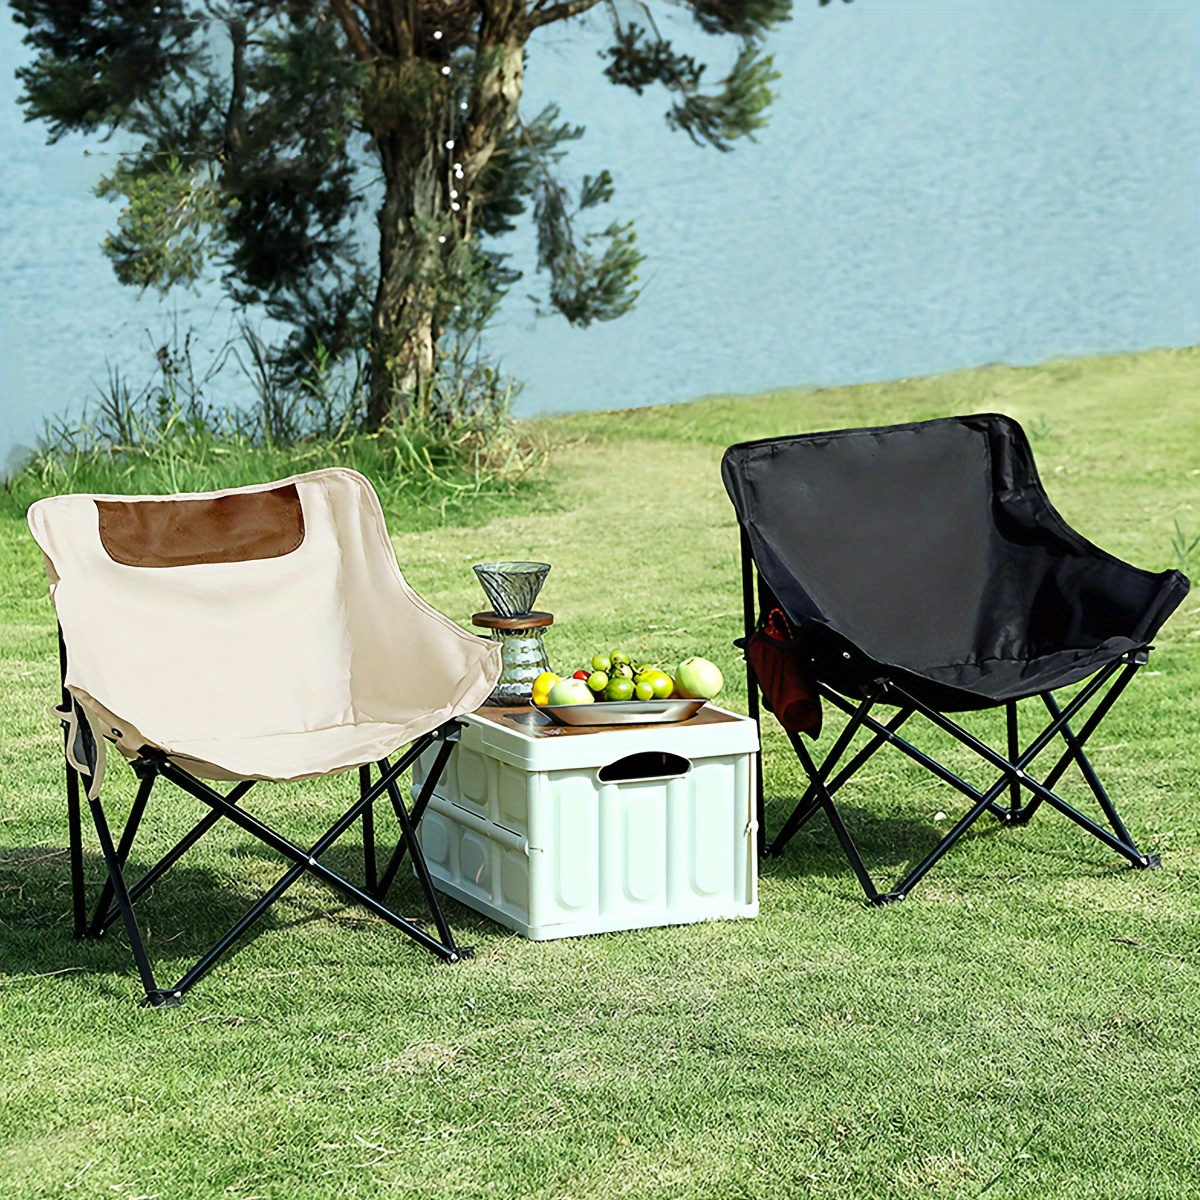 2-Piece Folding Outdoor Chair with Storage Bag, Portable Chair for